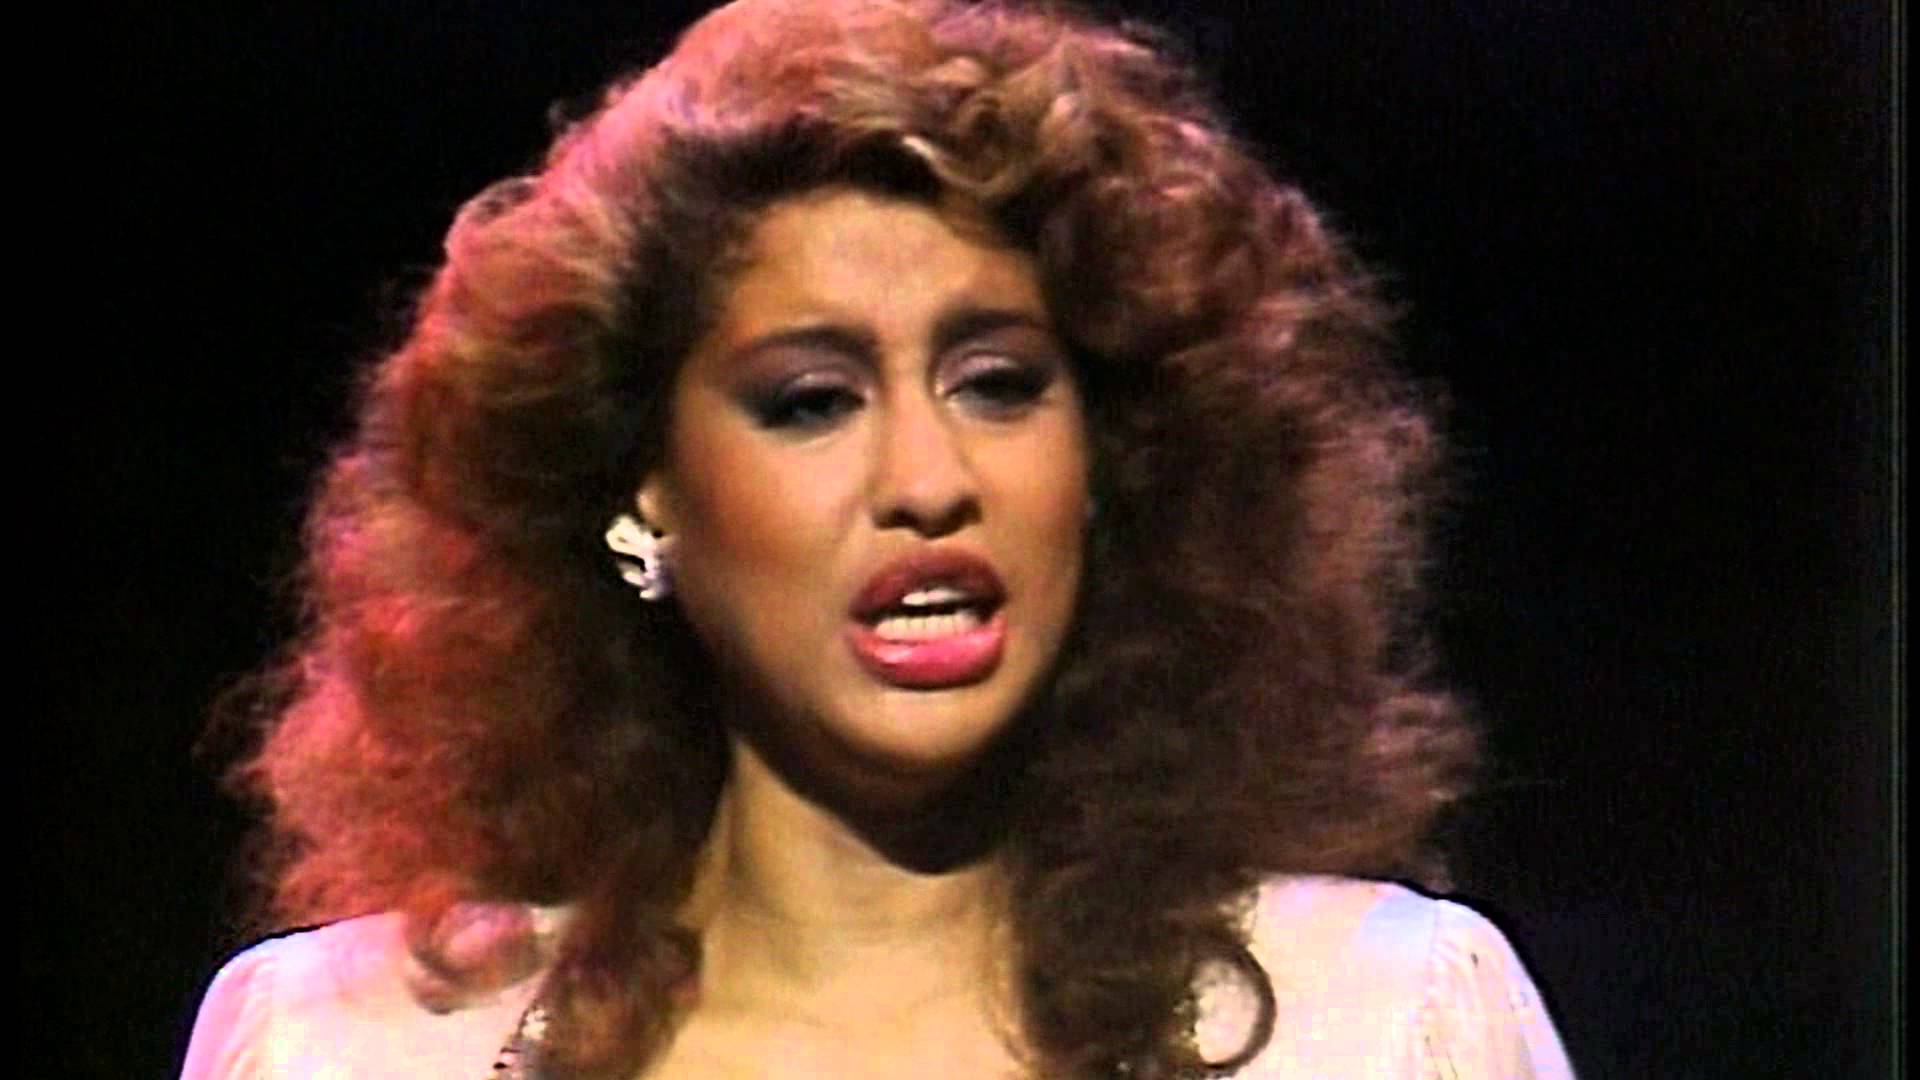 More Pictures Of Phyllis Hyman. phyllis hyman images. 